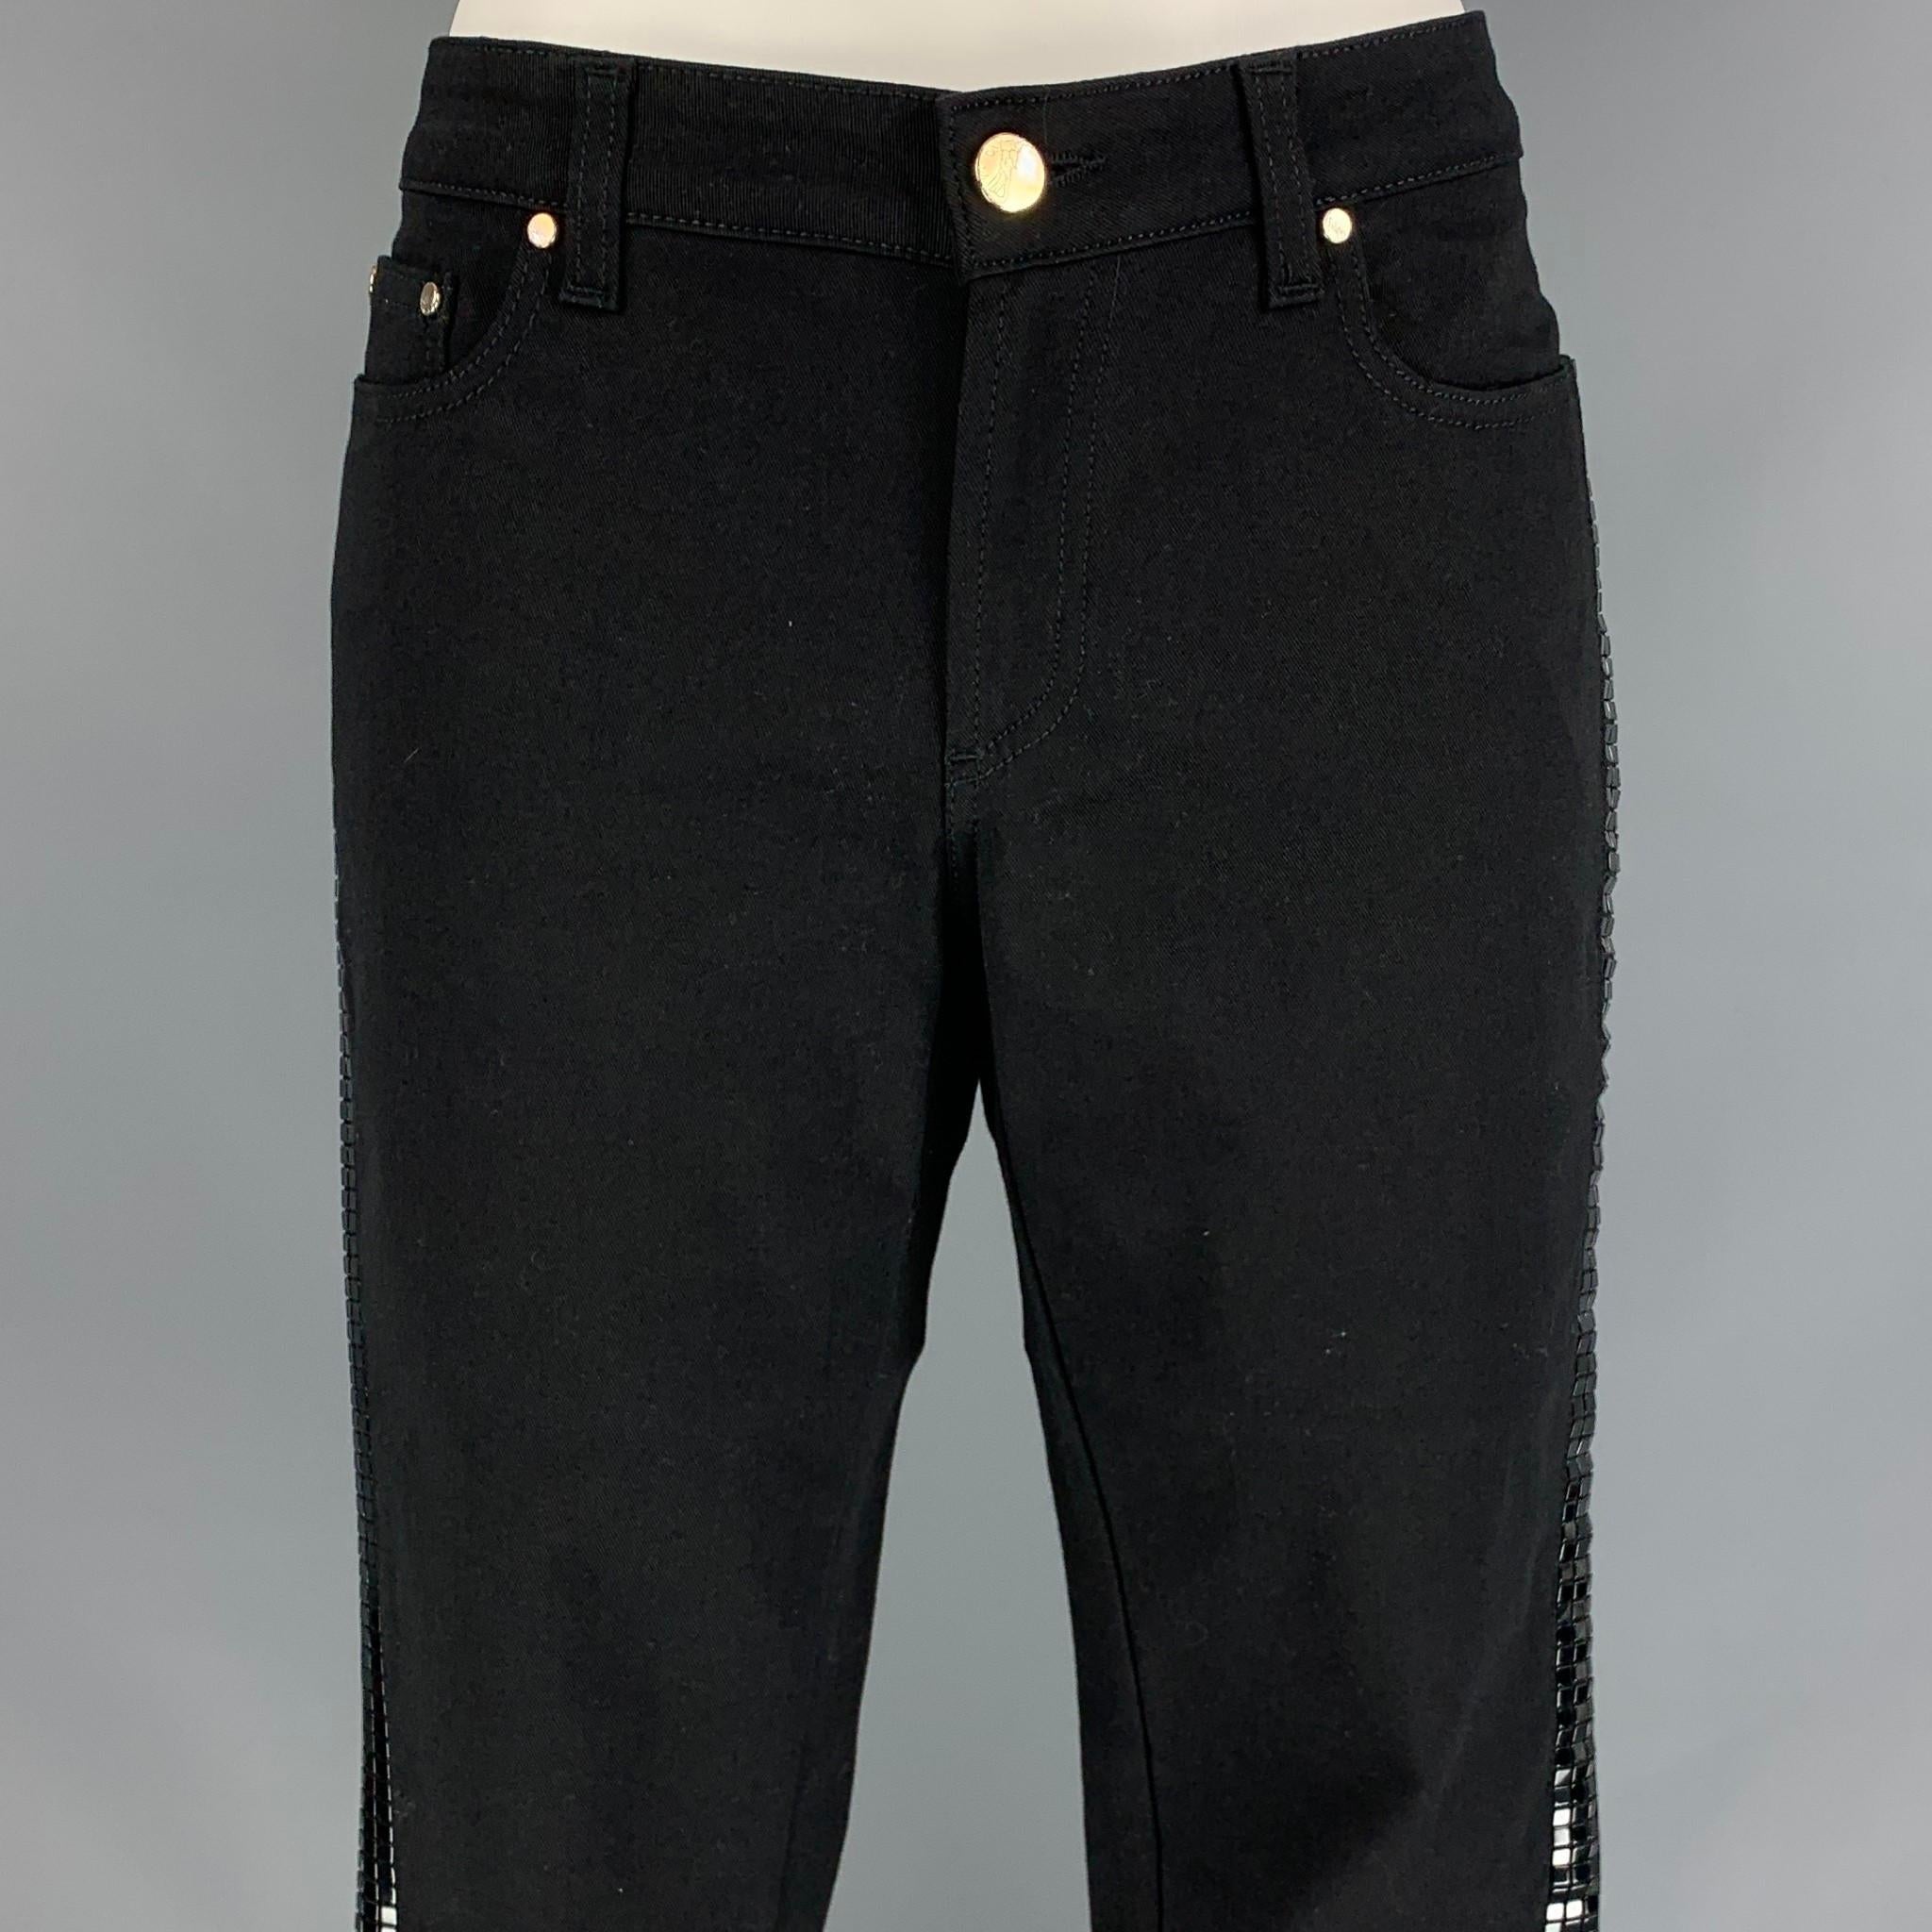 VERSACE COLLECTION casual pants comes in a black cotton blend featuring a skinny fit, side studded design, silver tone hardware, and a zip fly closure. Made in Romania. 

New With Tags. 
Marked: 24

Measurements:

Waist: 26 in.
Rise: 7.5 in.
Inseam: